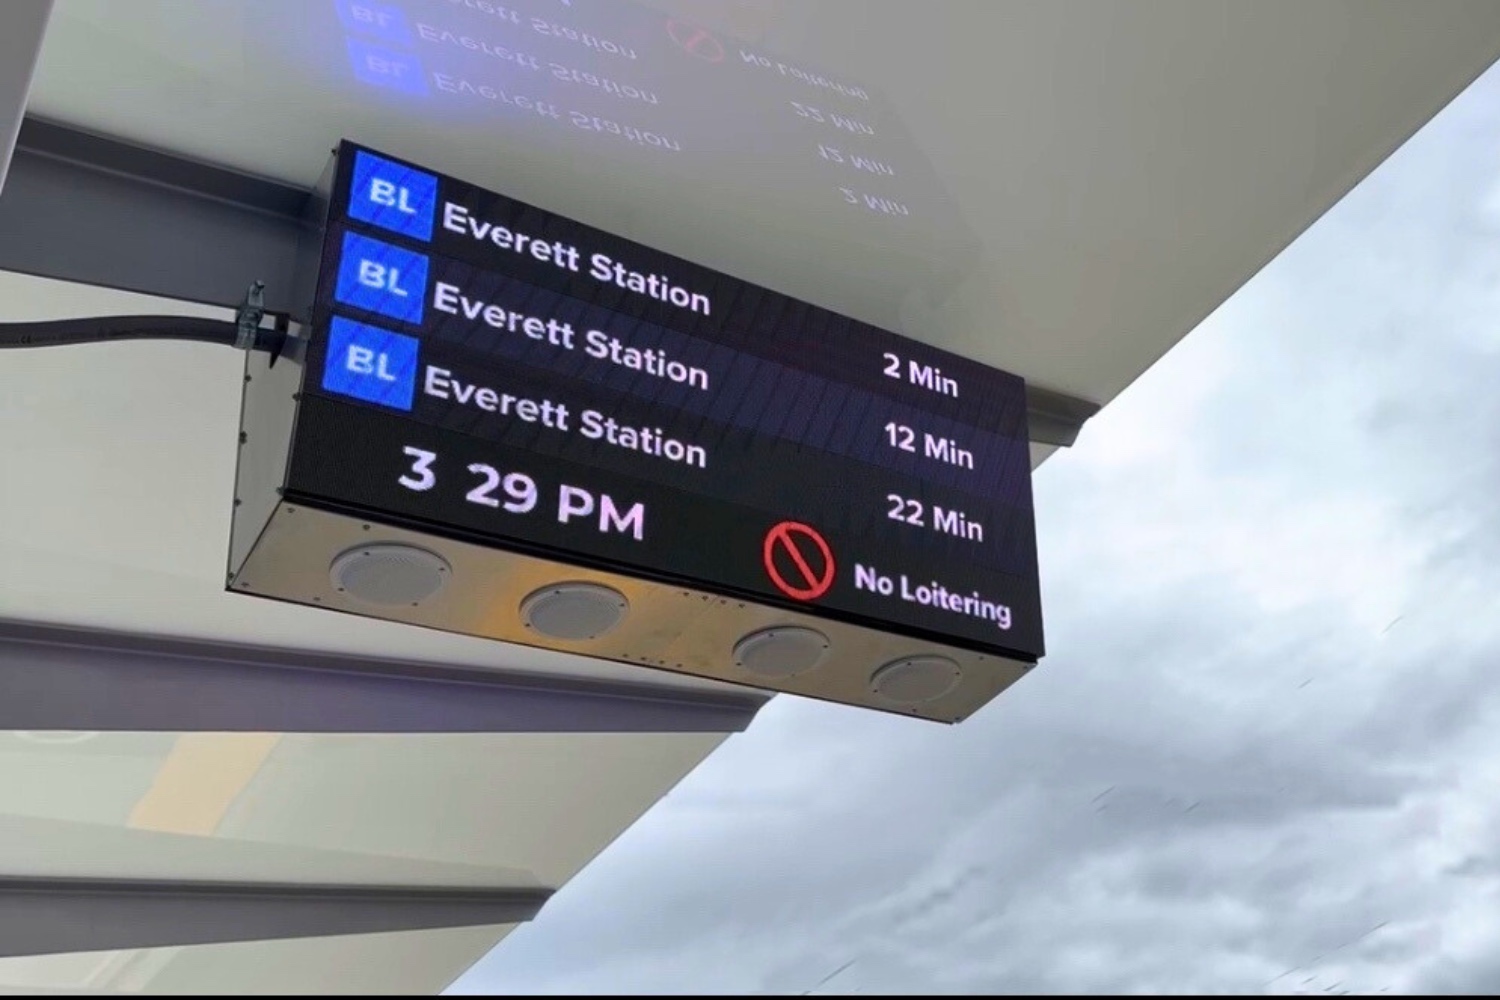 An overhead digital sign at a Swift Station